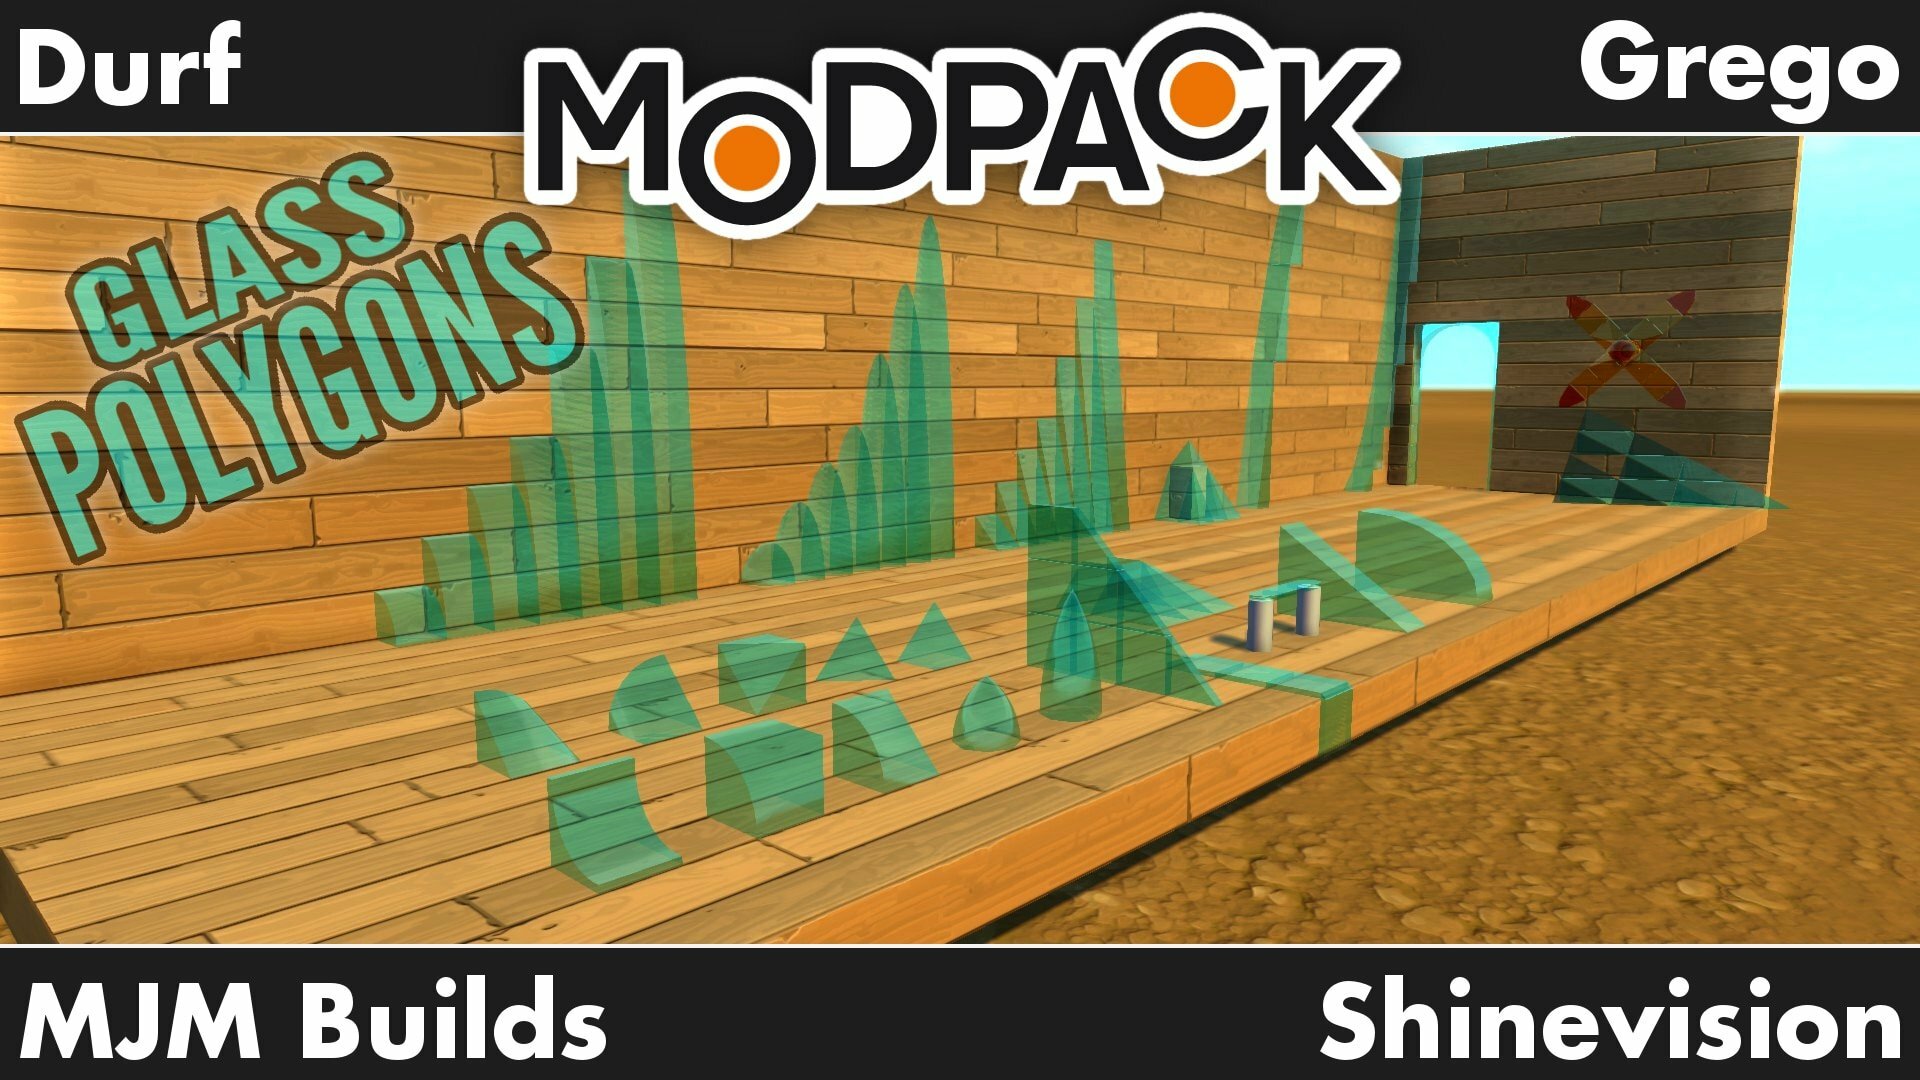 The Modpack Polygons Glass